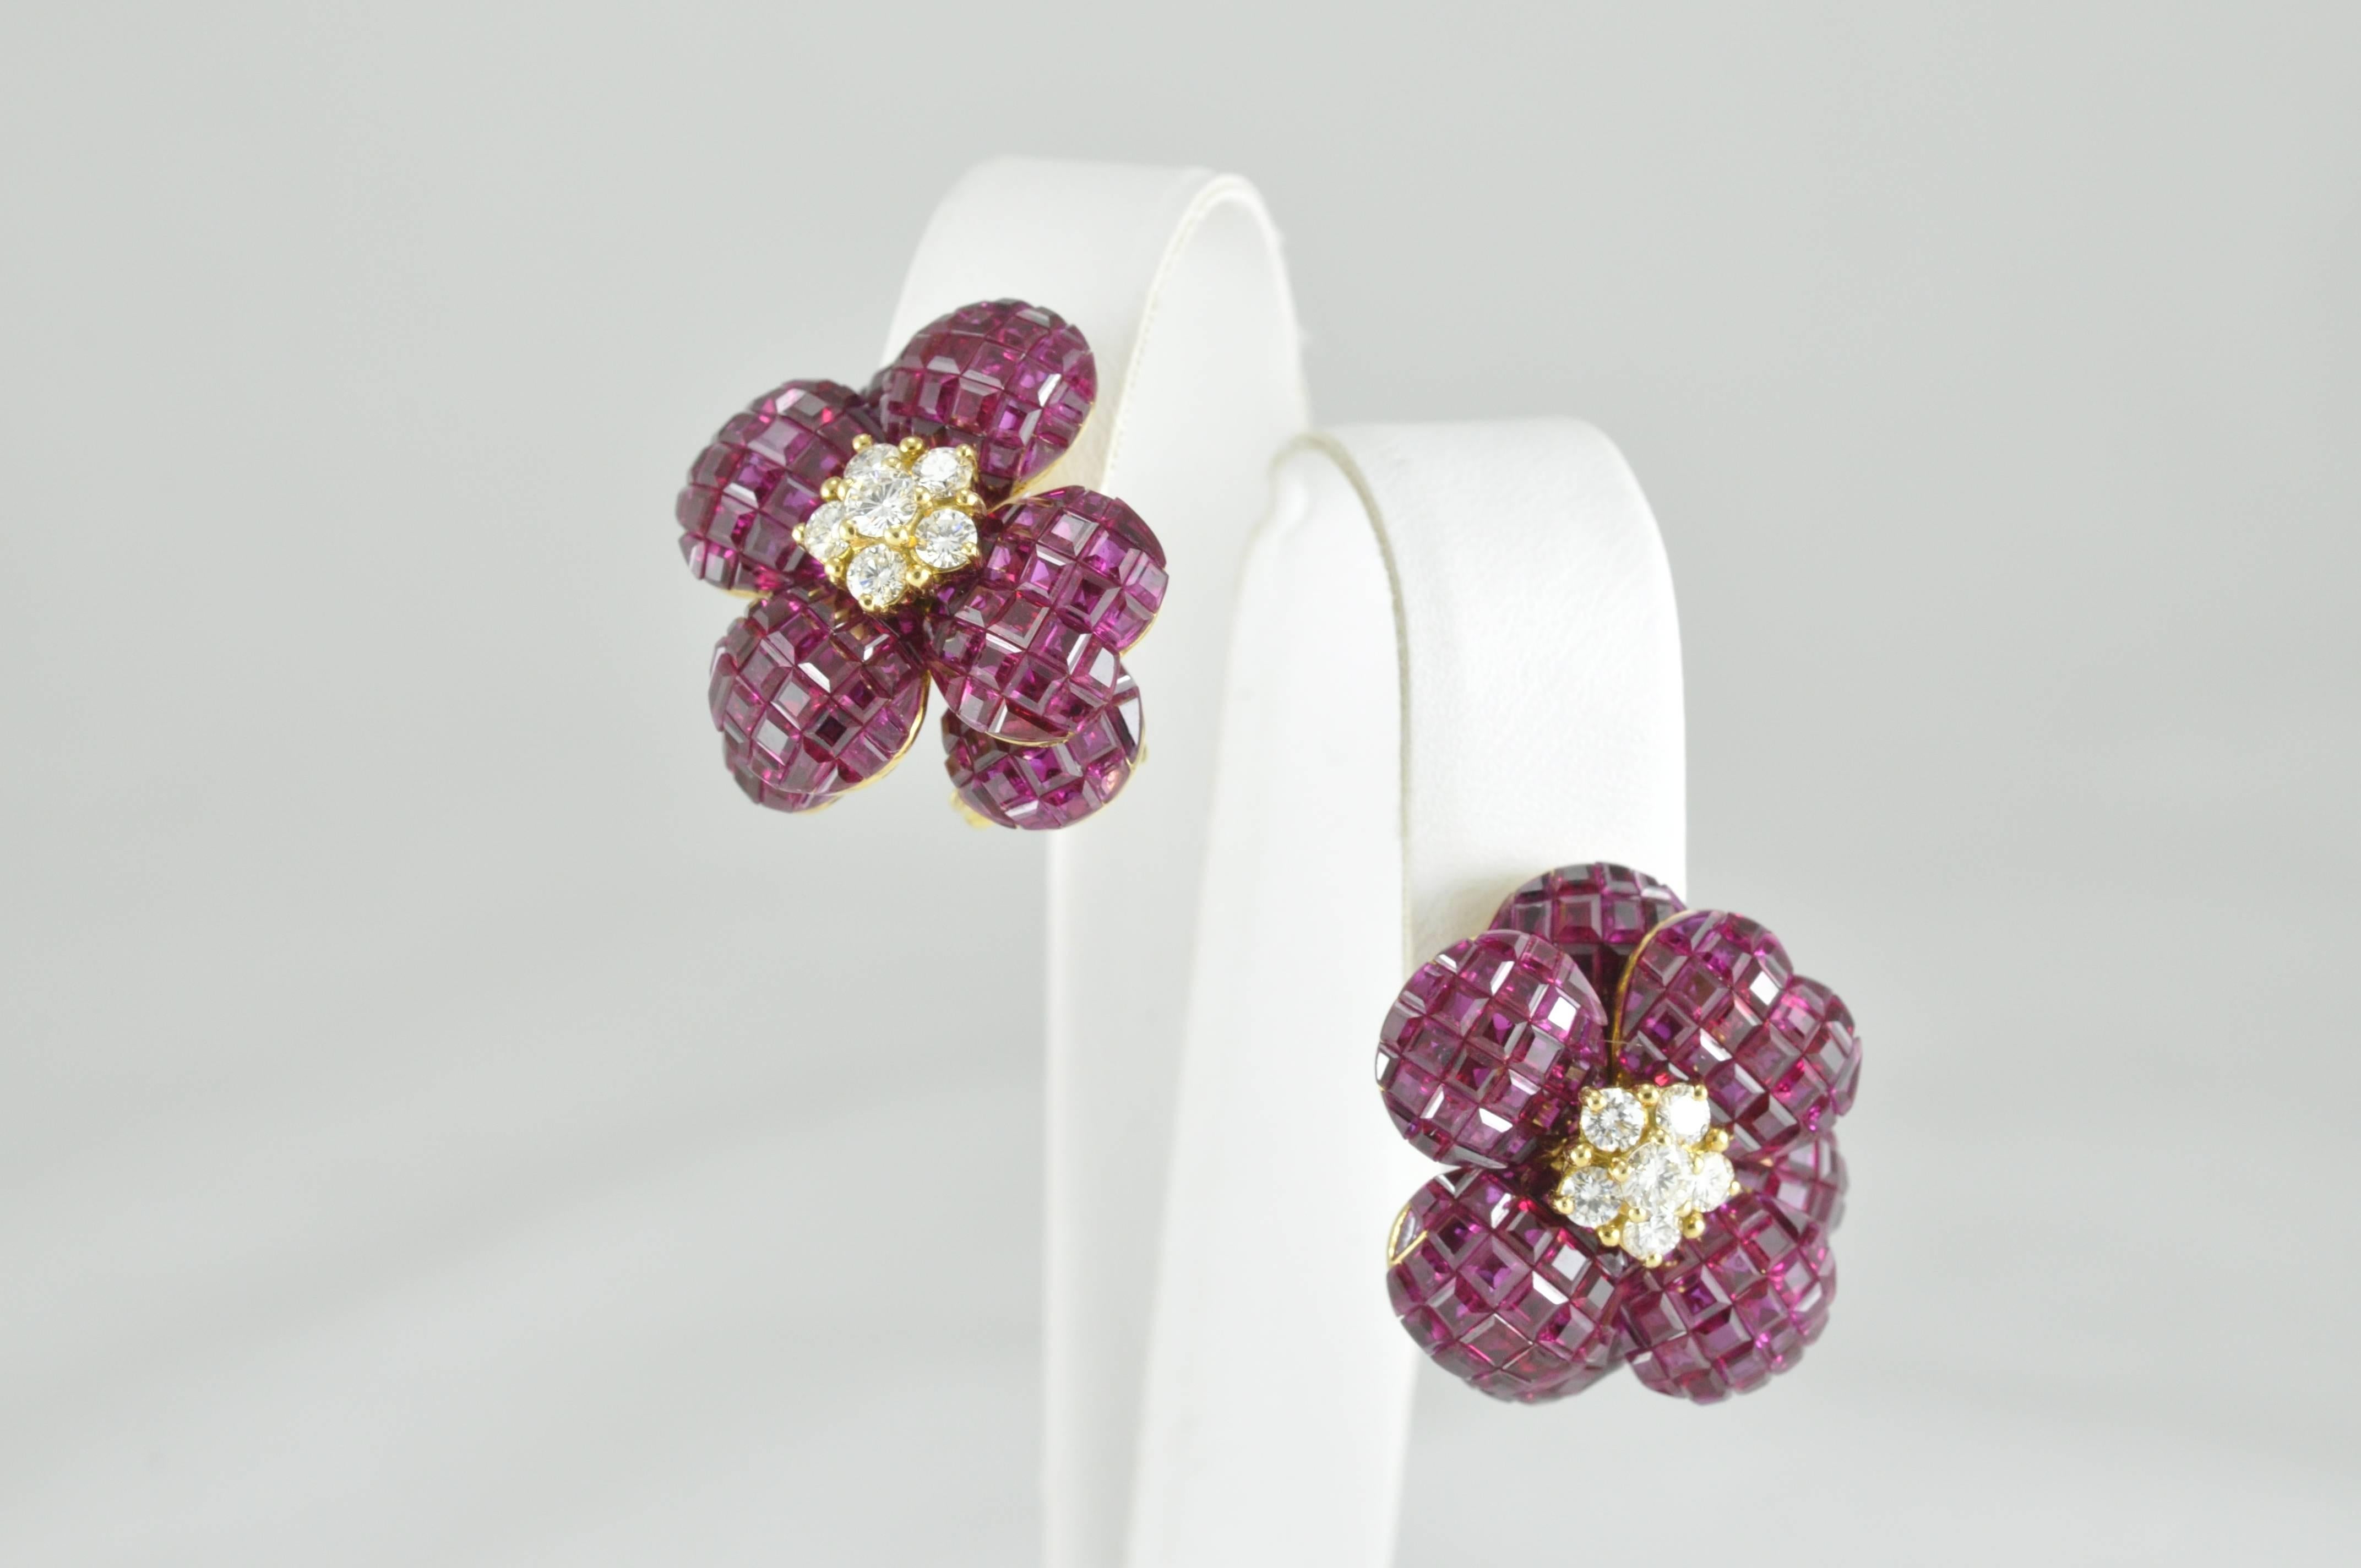 18k Yellow Gold Flower Earrings featuring 8.0ctw Rubies and 0.6ctw Diamonds invisibly set to form these beautiful, delicate looking earrings. These earrings also have the feature of a folding post, so they can be worn as post or clip